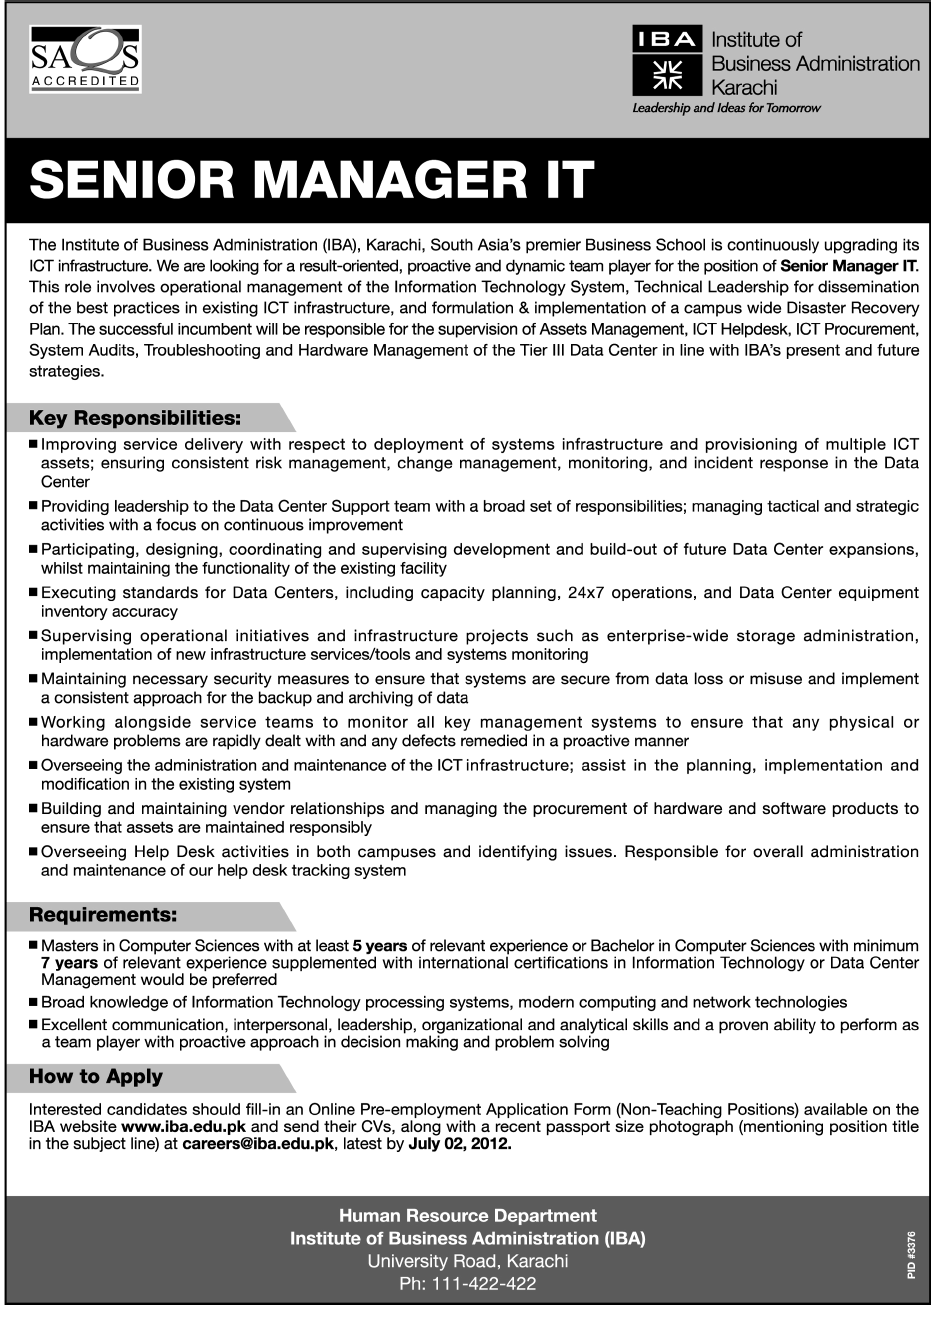 Senior Manager IT Required at Institute of Business Administration (IBA)